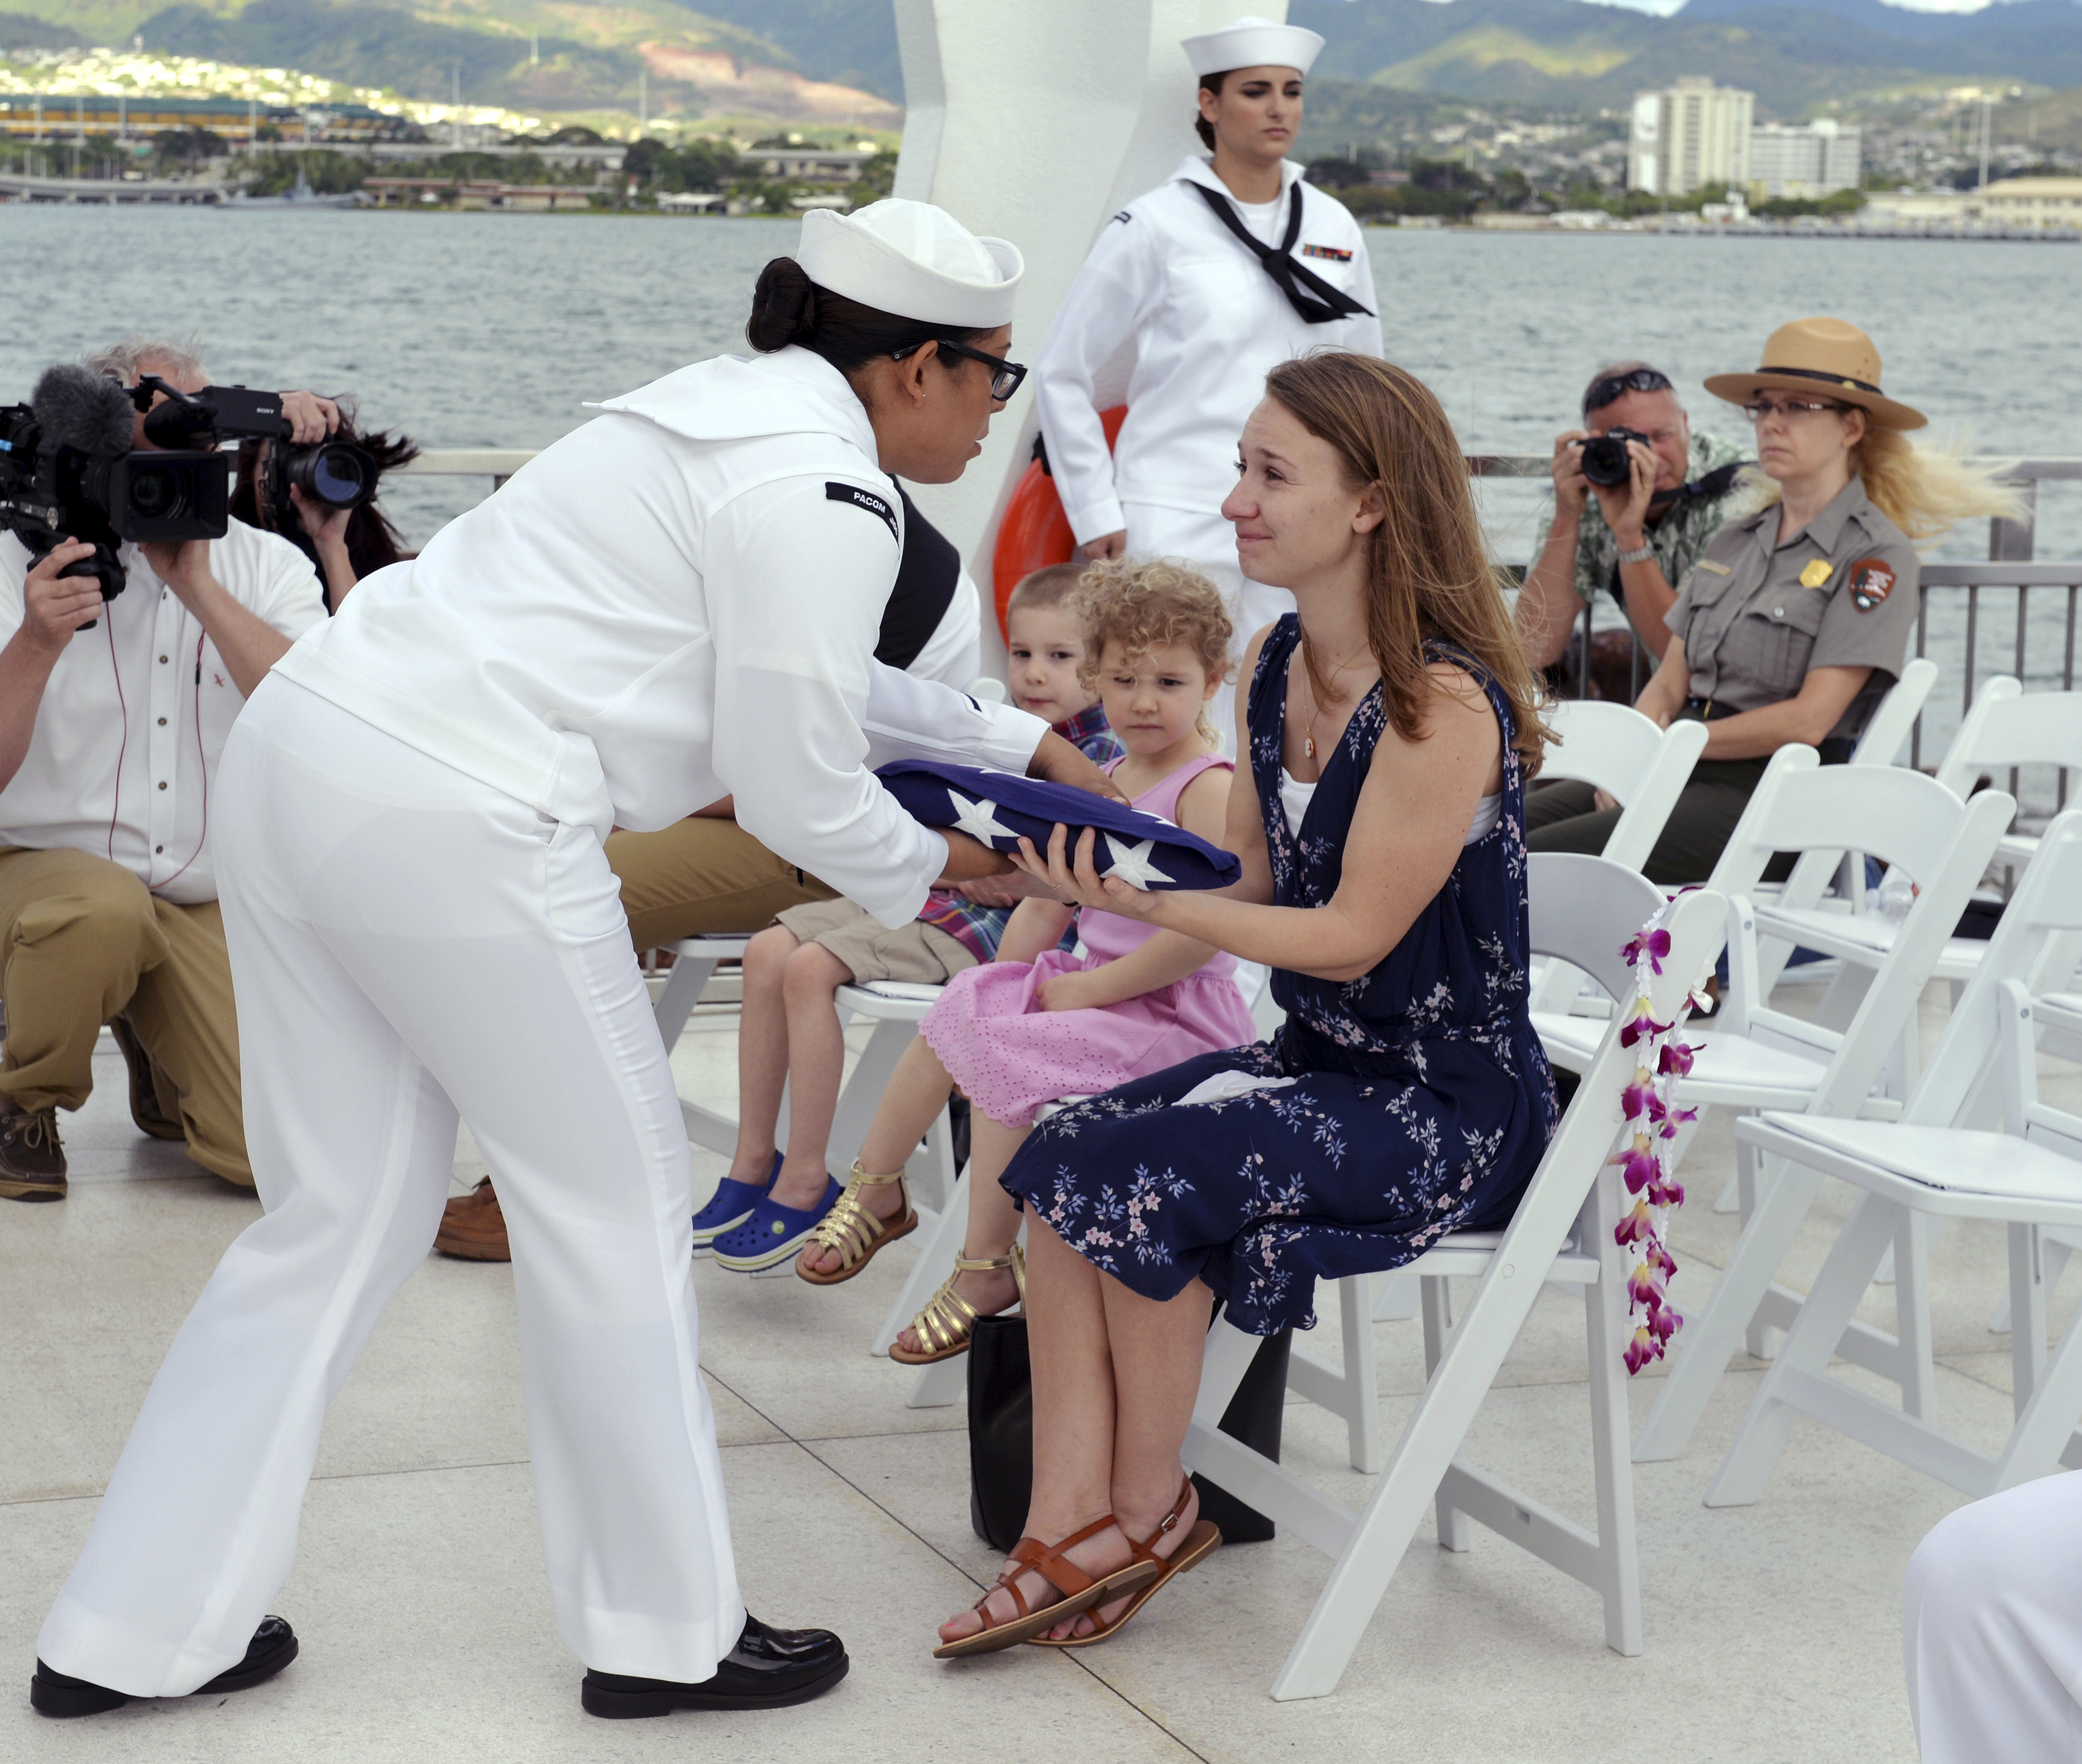 In this Saturday, April 15, 2017 photo released by Pacific Historic Parks, Jessica Marino, center, granddaughter of Raymond Haerry, receives the U.S. flag from the U.S. Navy during a ceremony at the USS Arizona Memorial in Honolulu. (Elaine Simon/Pacific Historic Parks via AP)